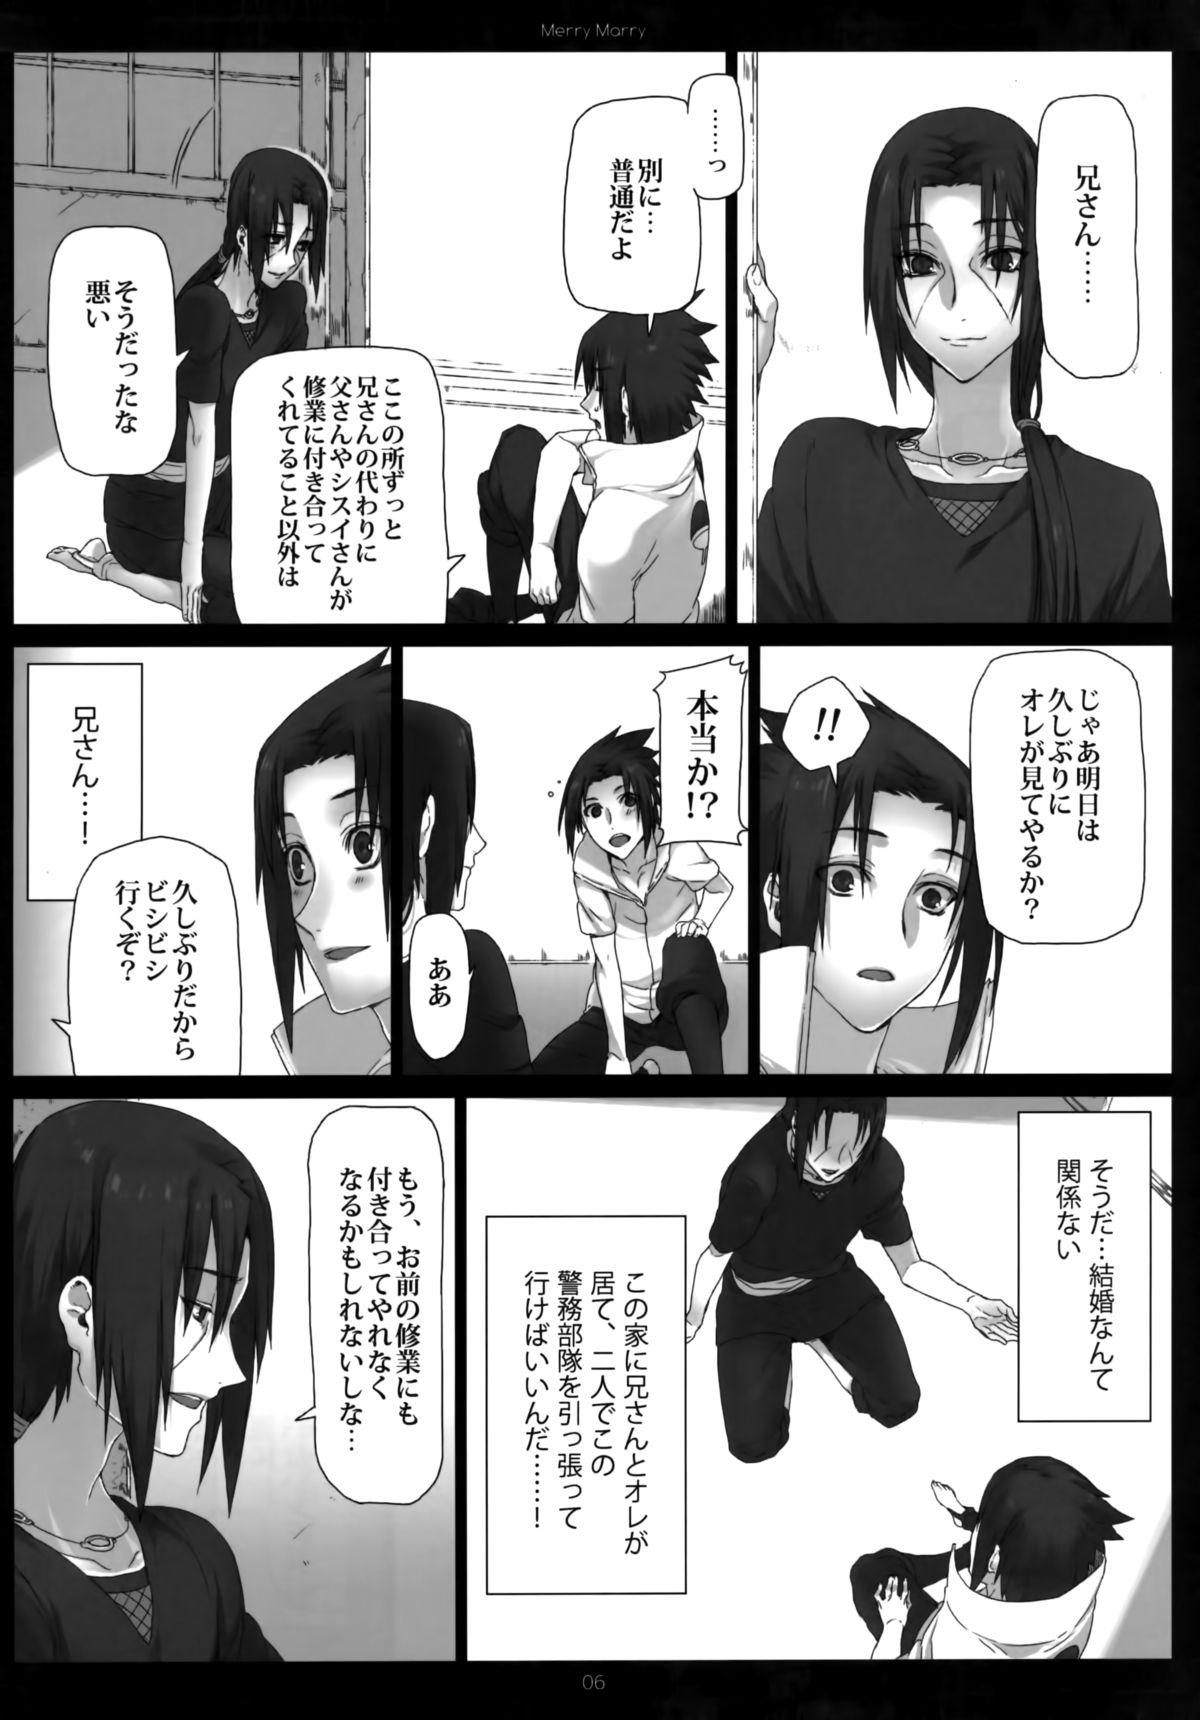 Solo Female Merry Marry - Naruto Shower - Page 6